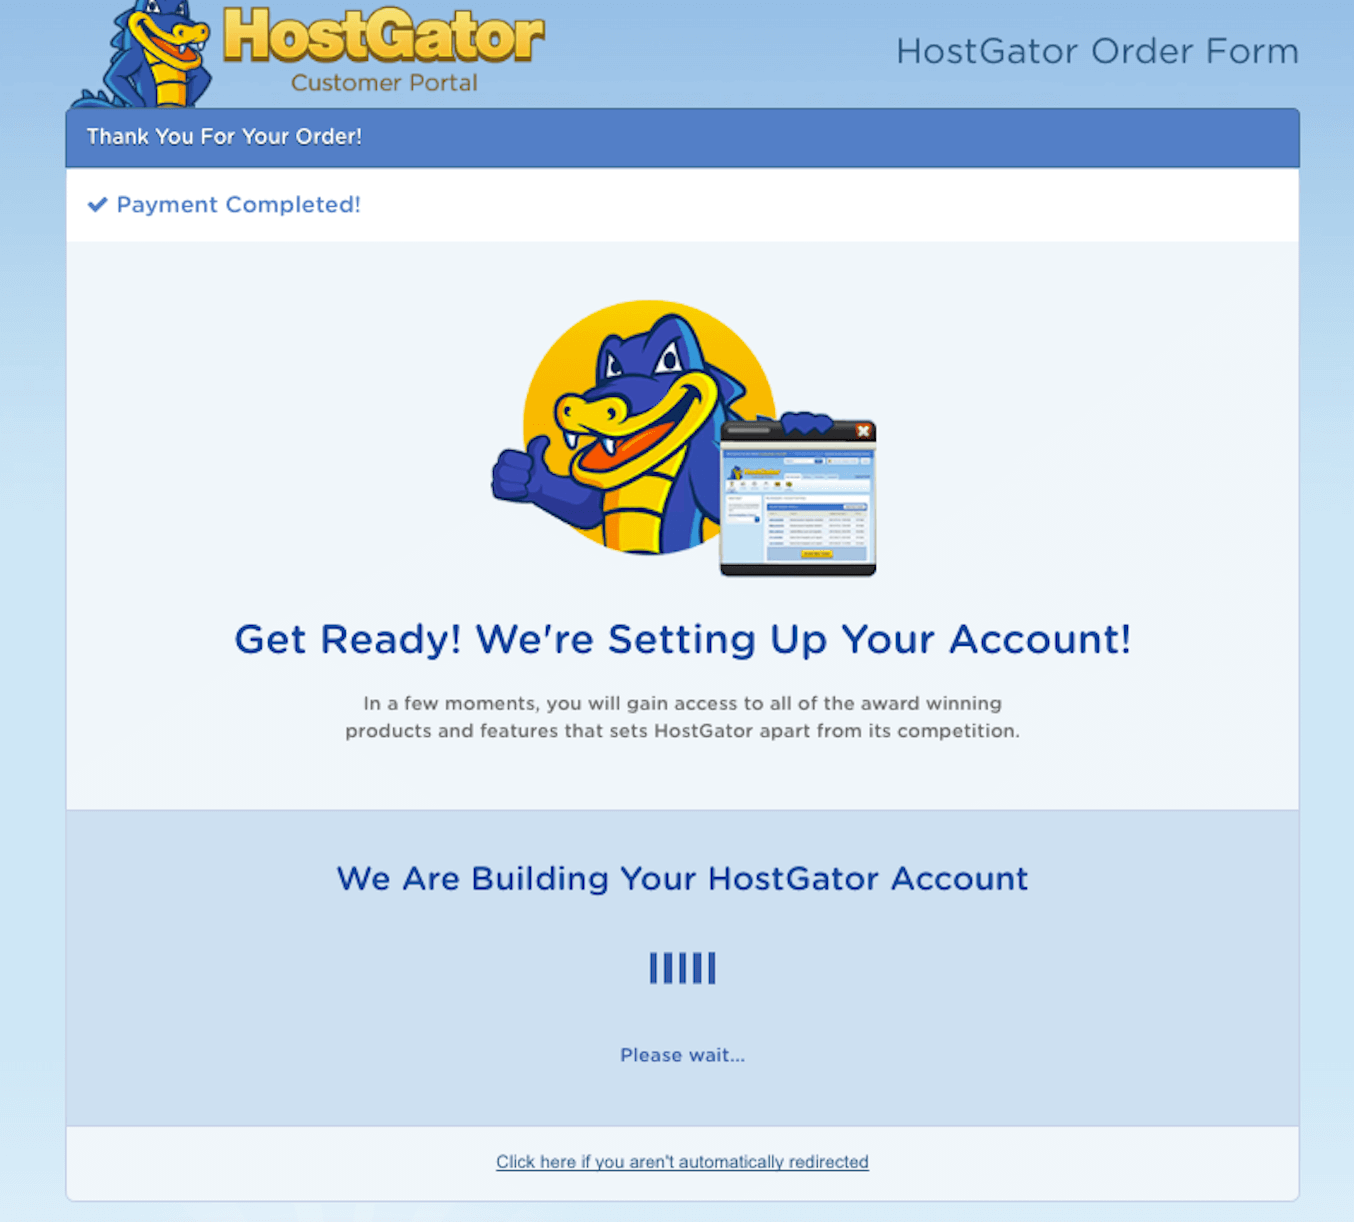 Processing a hosting account order